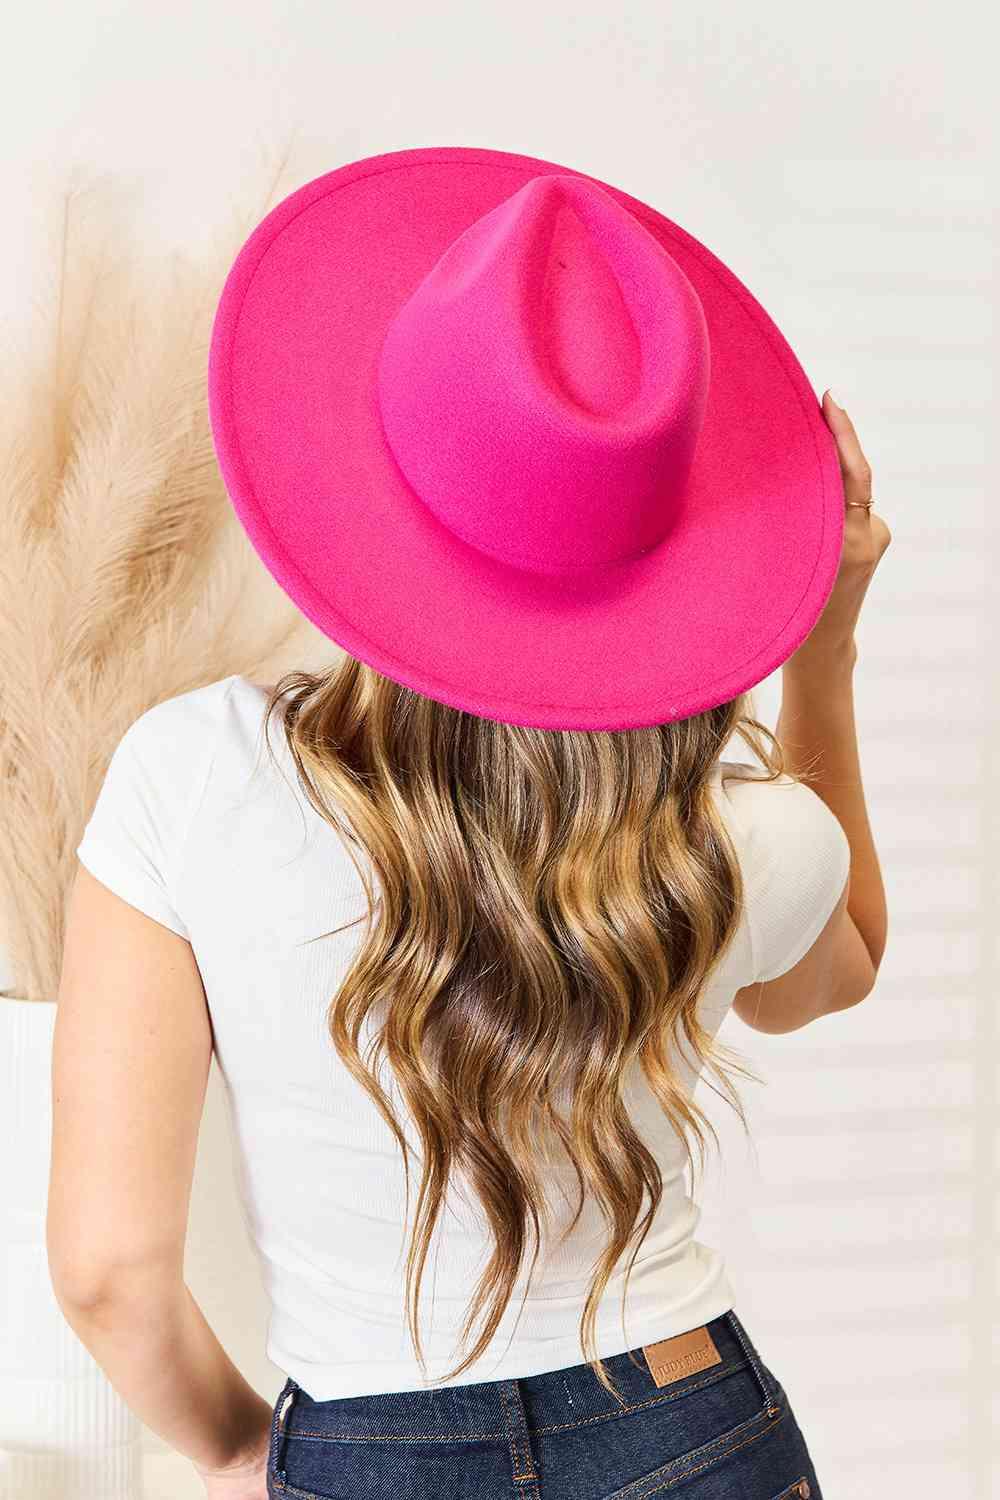 a woman with long hair wearing a pink hat